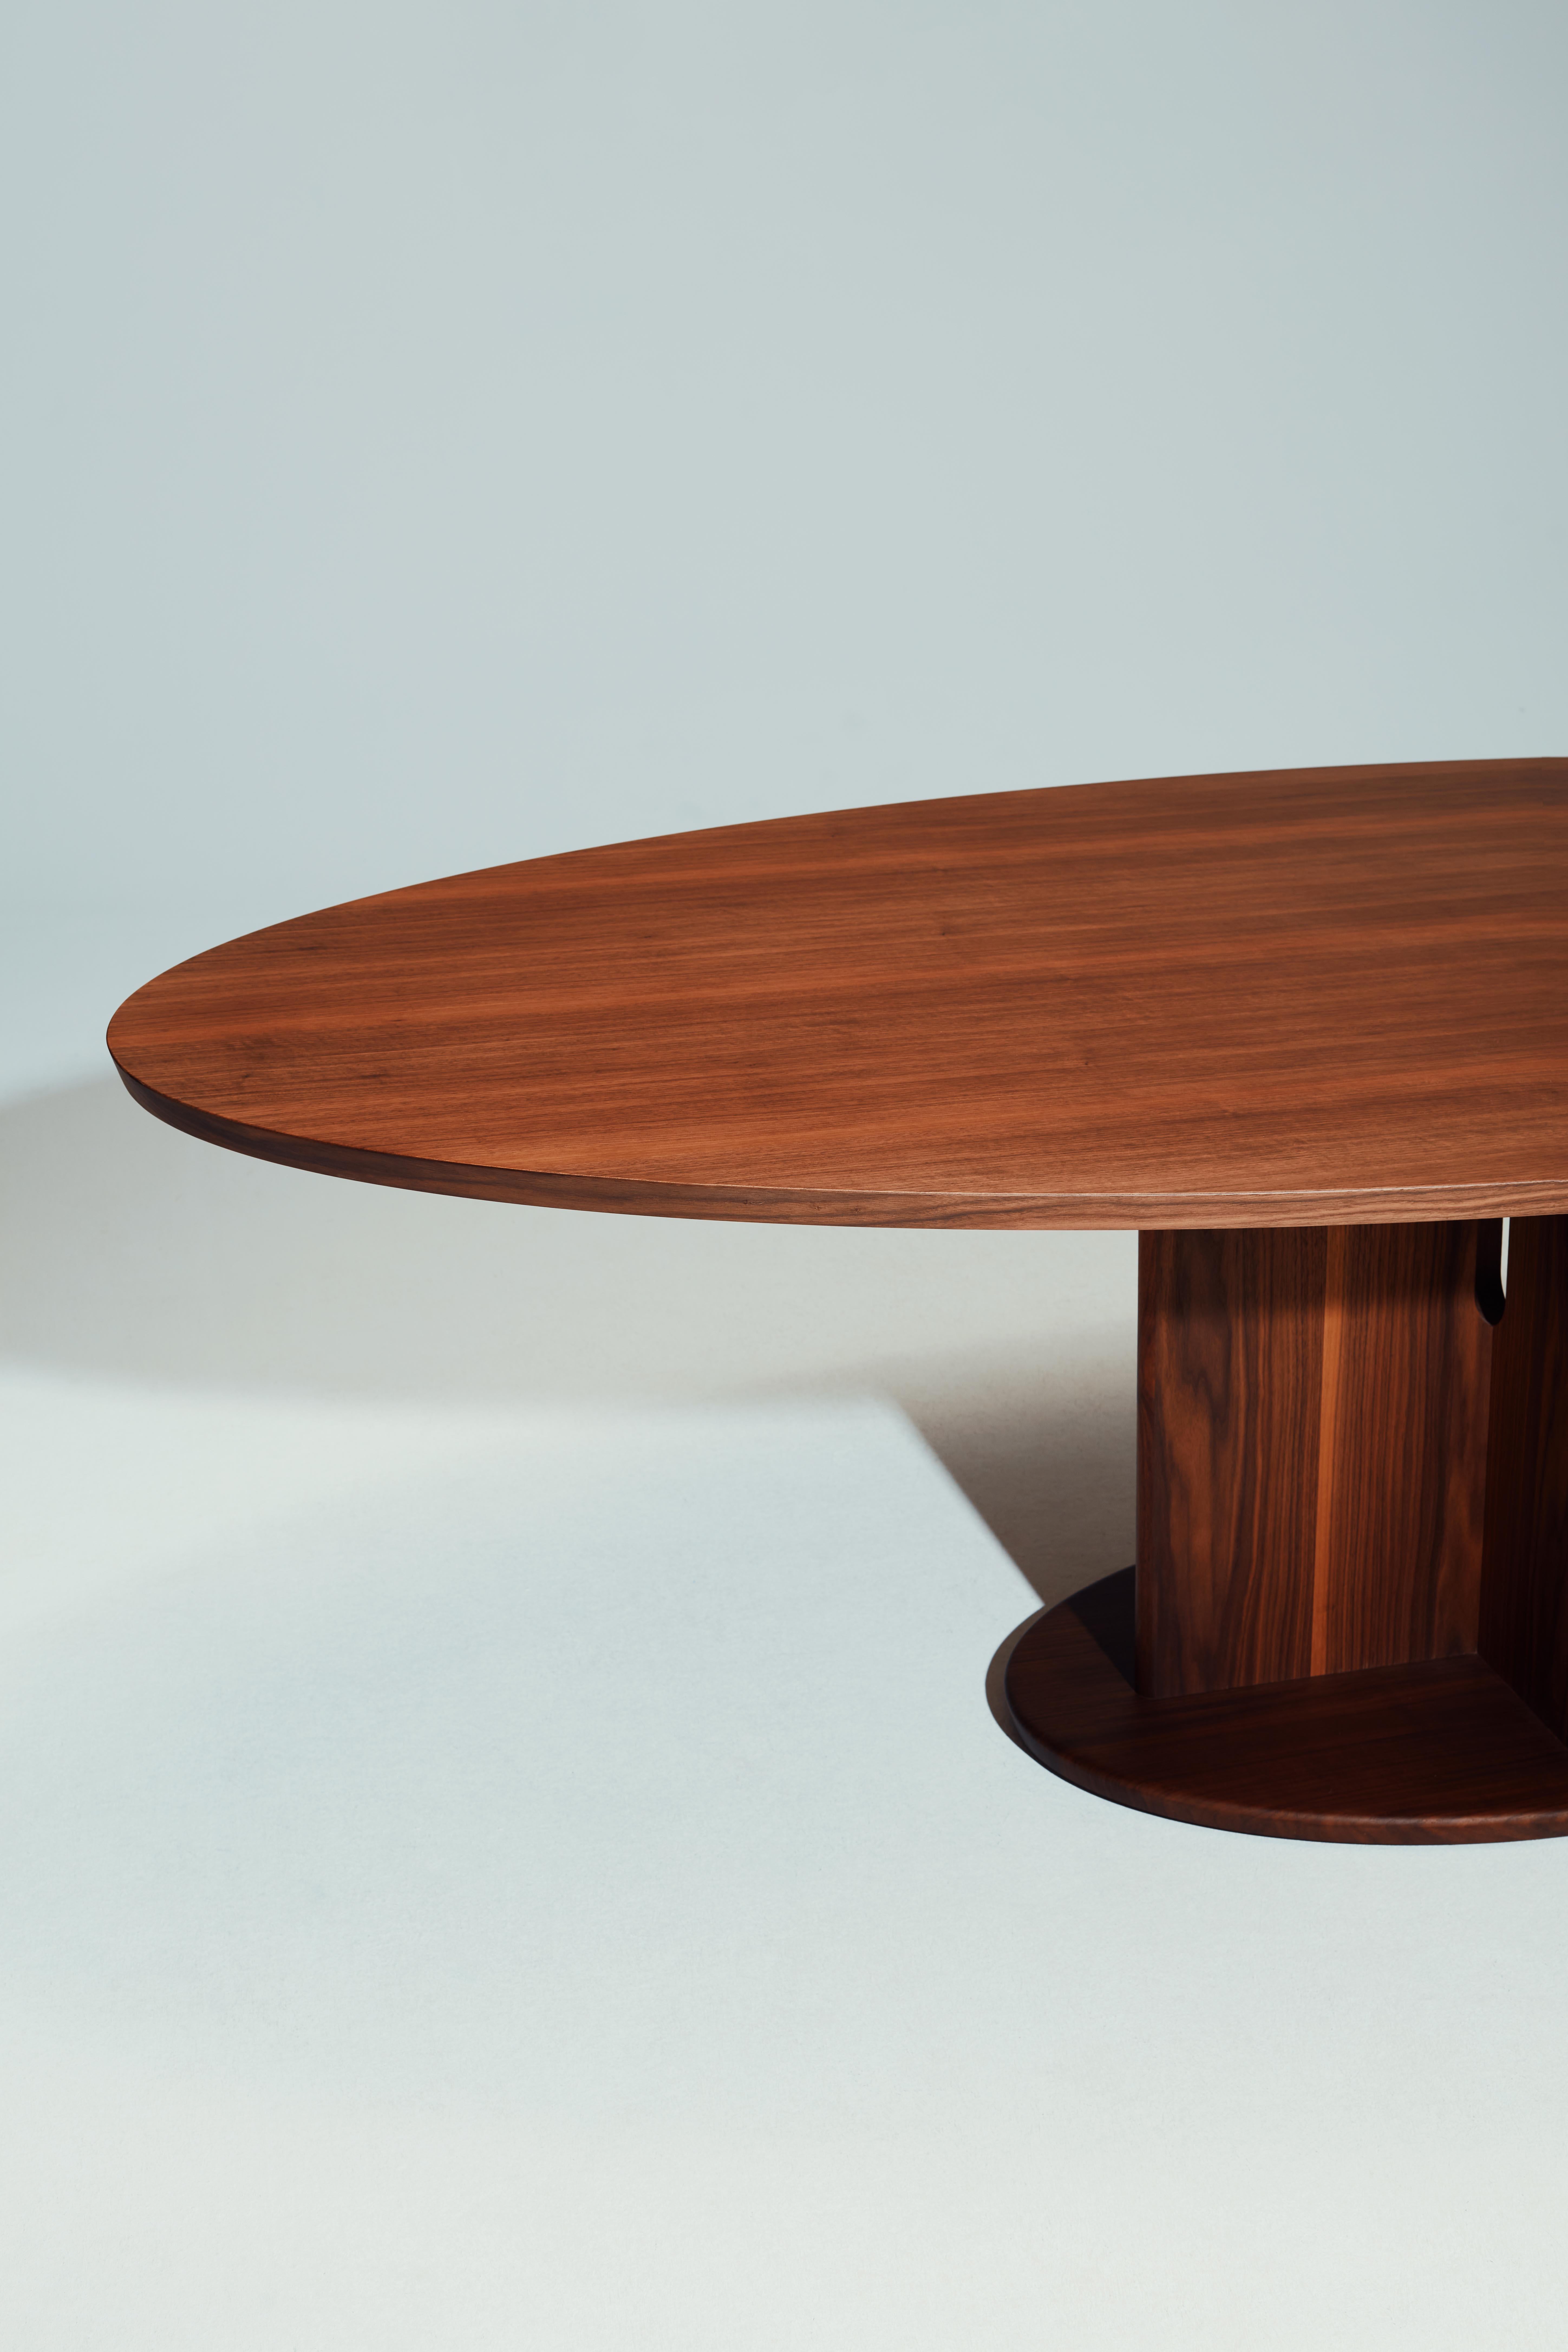 French Intersection Oval Table by Neri&Hu